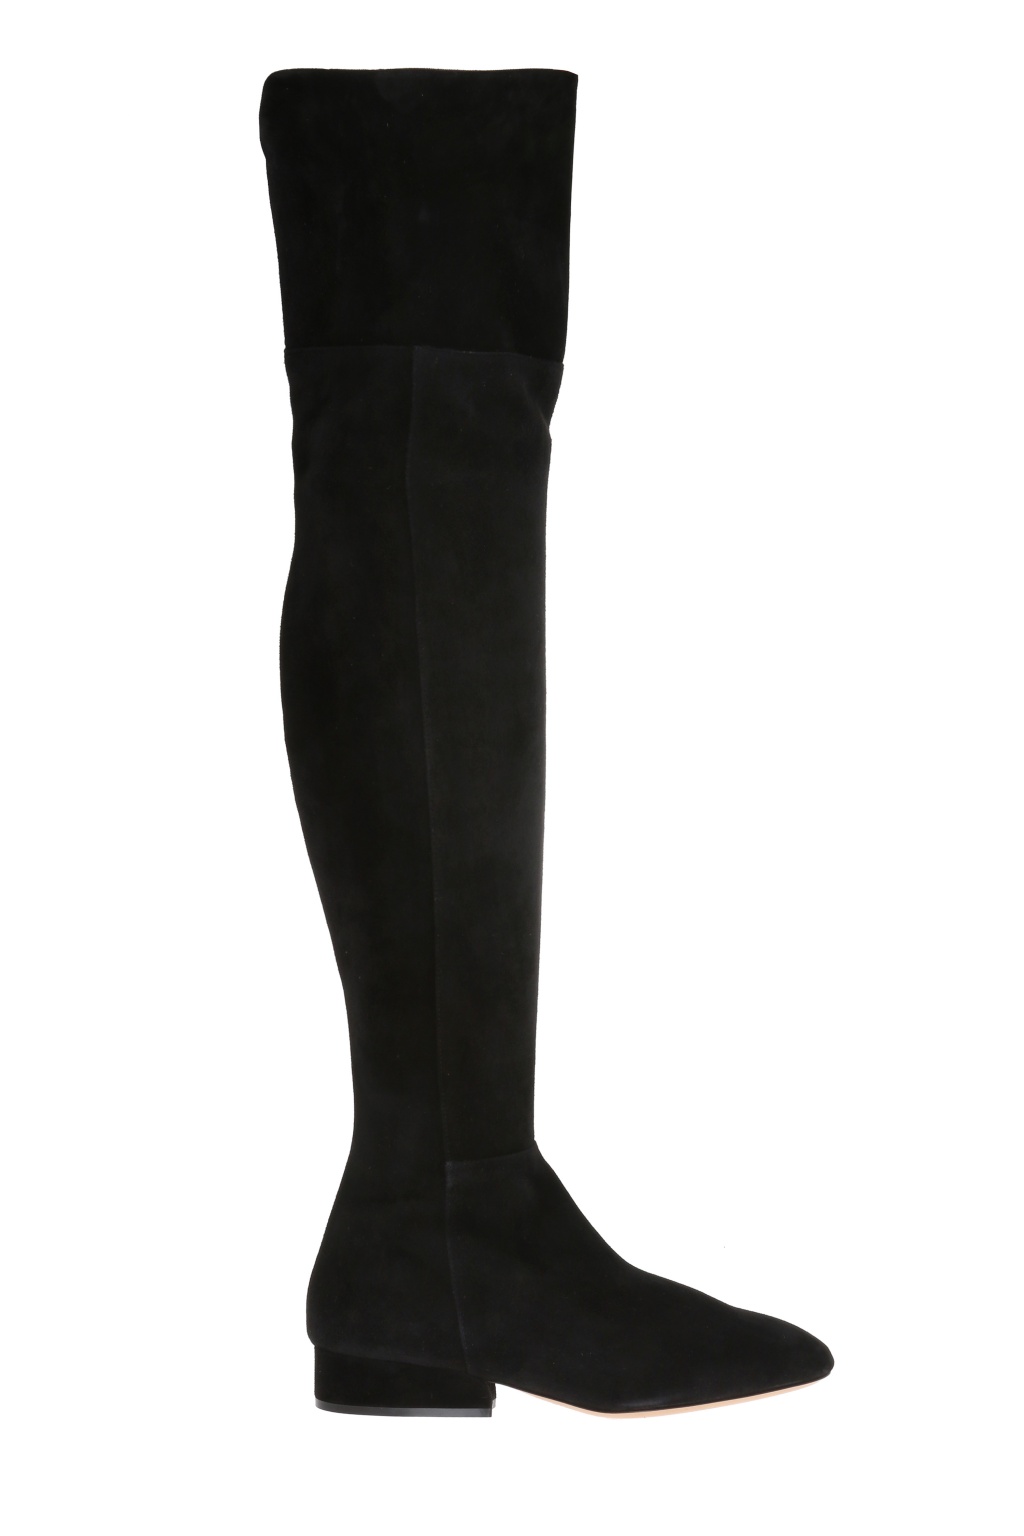 over the knee boots canada